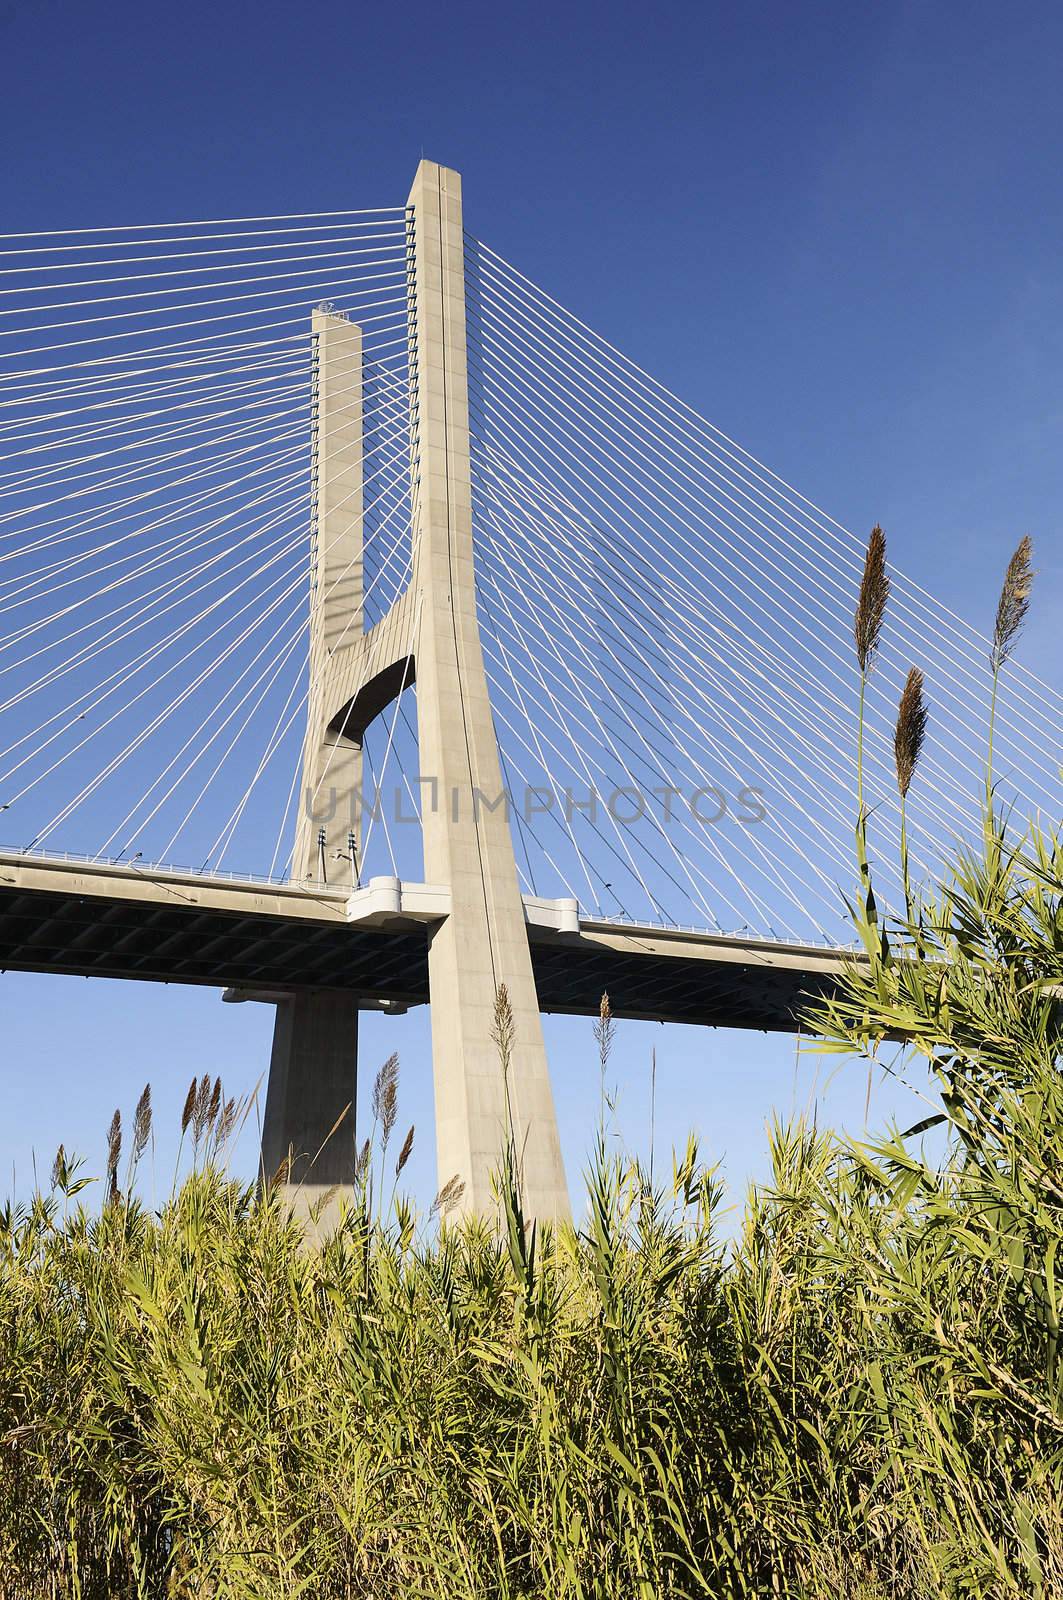 Vasco da Gama bridge is the largest in Europe over the Tagus river